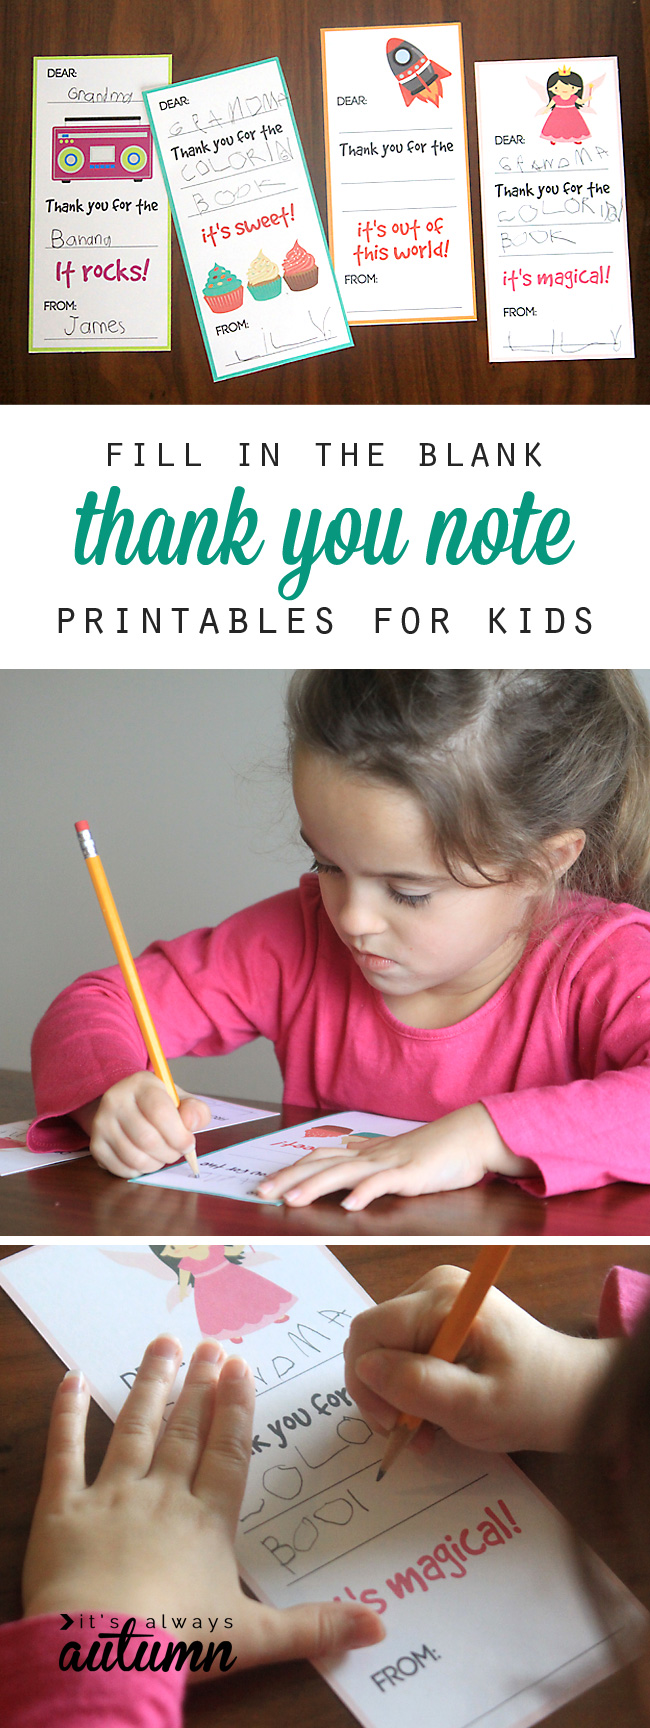 fill in the blank thank you cards for kids; girl working on a thank you card